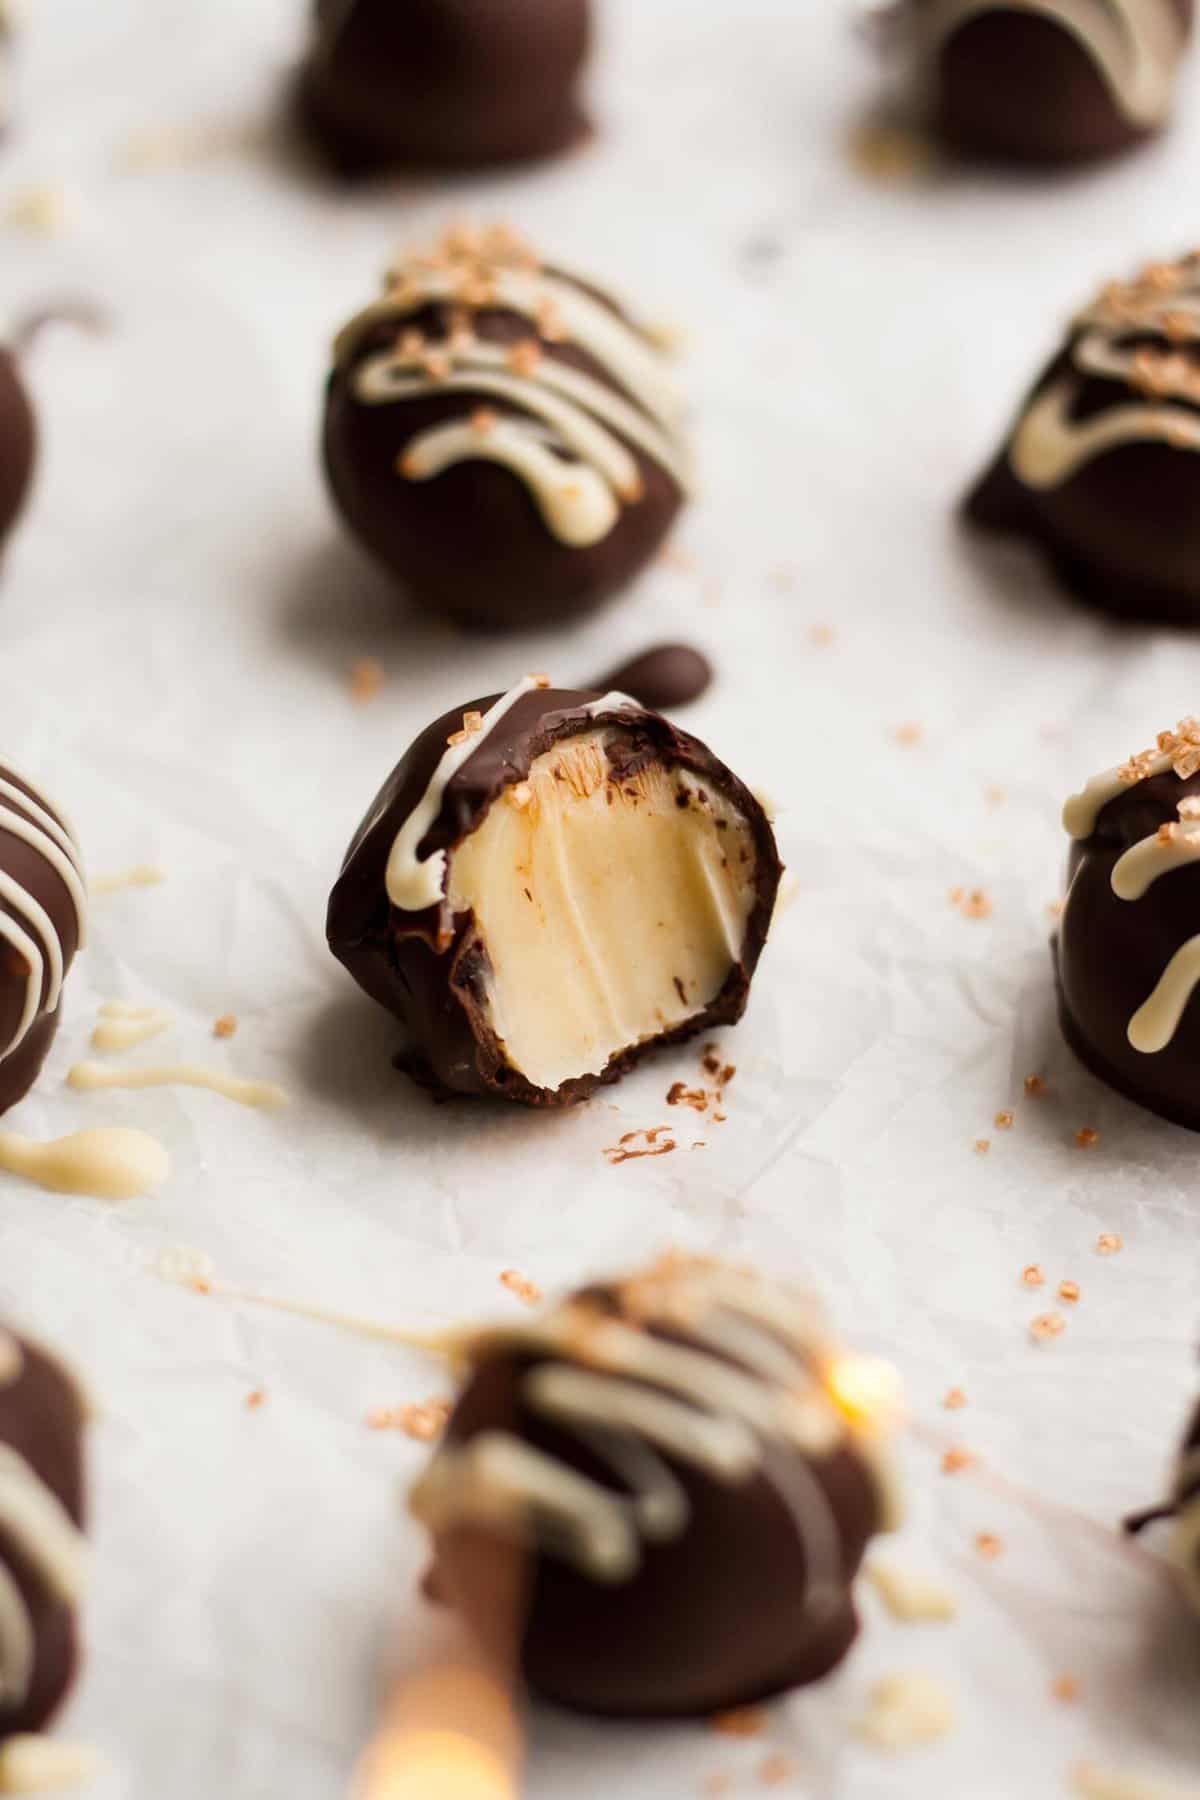 White Chocolate Nutmeg Truffles - these indulgent truffles are spiced with that wonderful festive spice, nutmeg. They would make the perfect edible gift! | eatloveeats.com